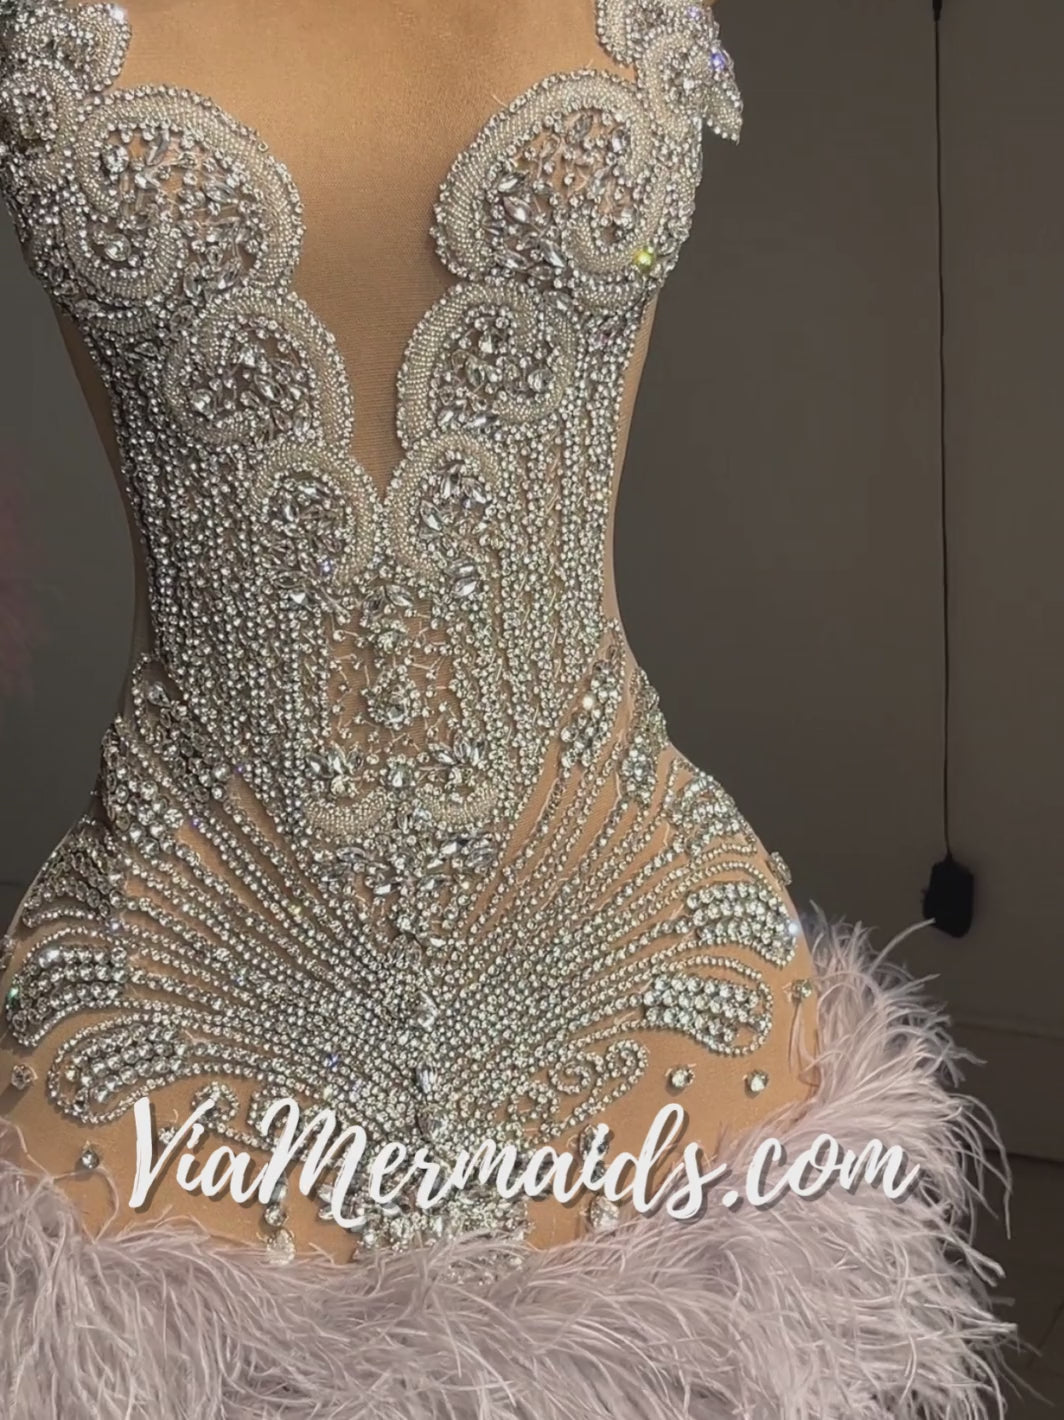 The Girl They LOVE TO HATE Custom Silver Rhinestone Dress with Feathers